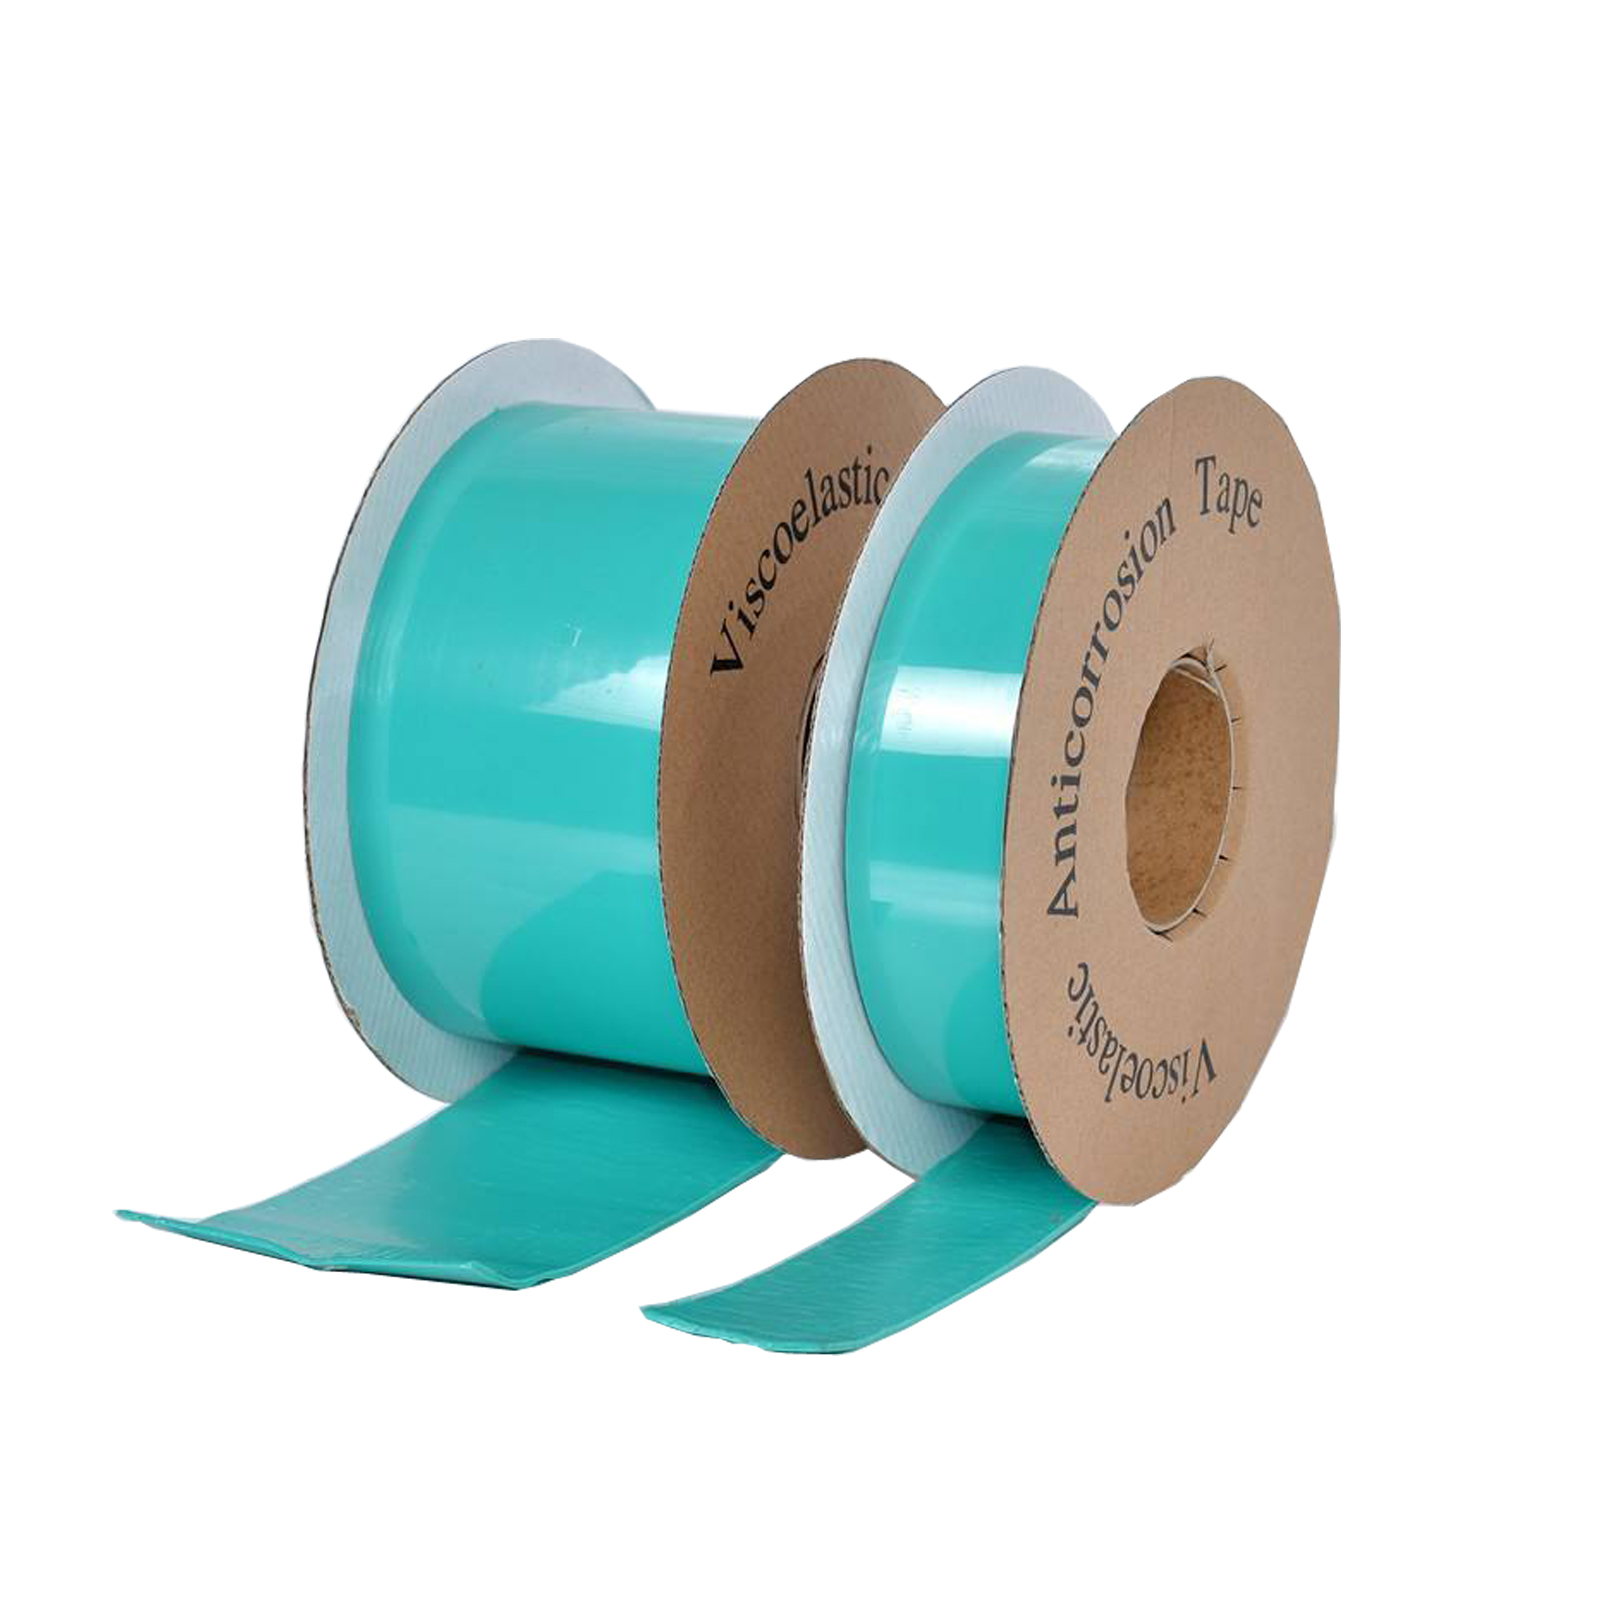 HLD T870 Thick Mastic Pipeline Filler Tape